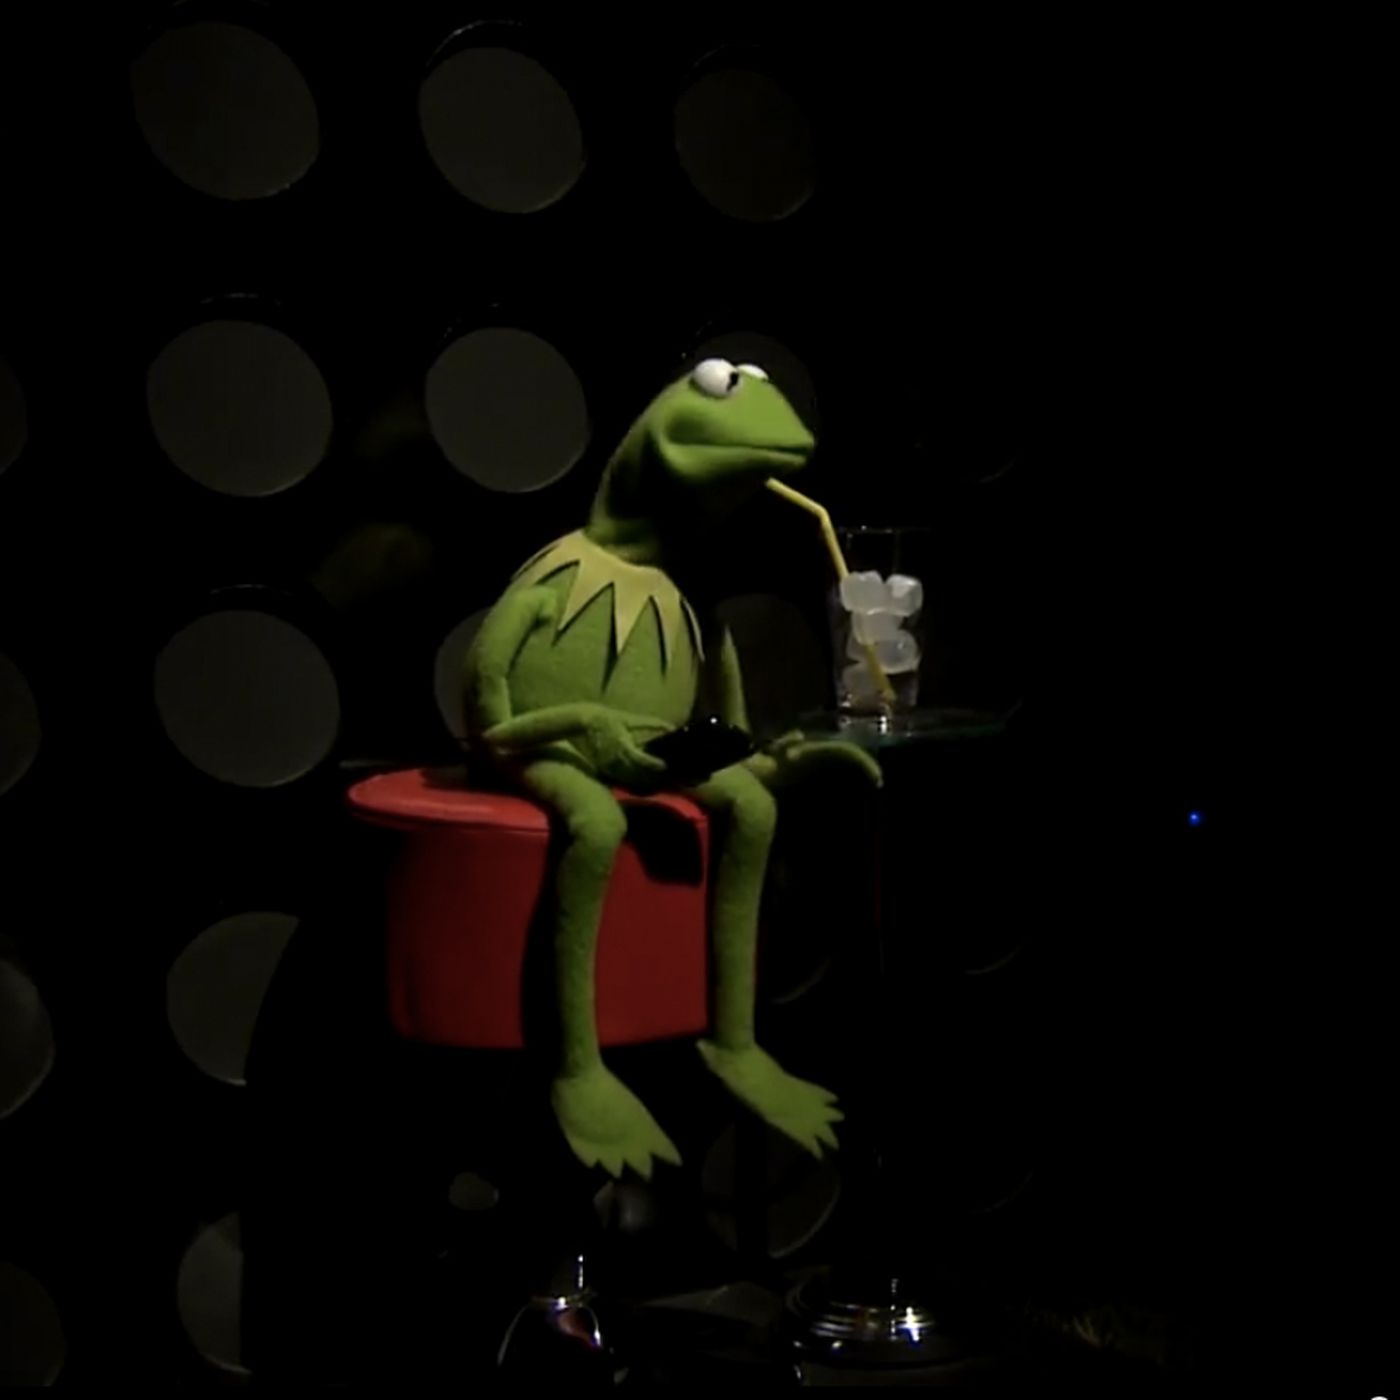 Disney fired Kermit the Frog's voice actor. The result? An